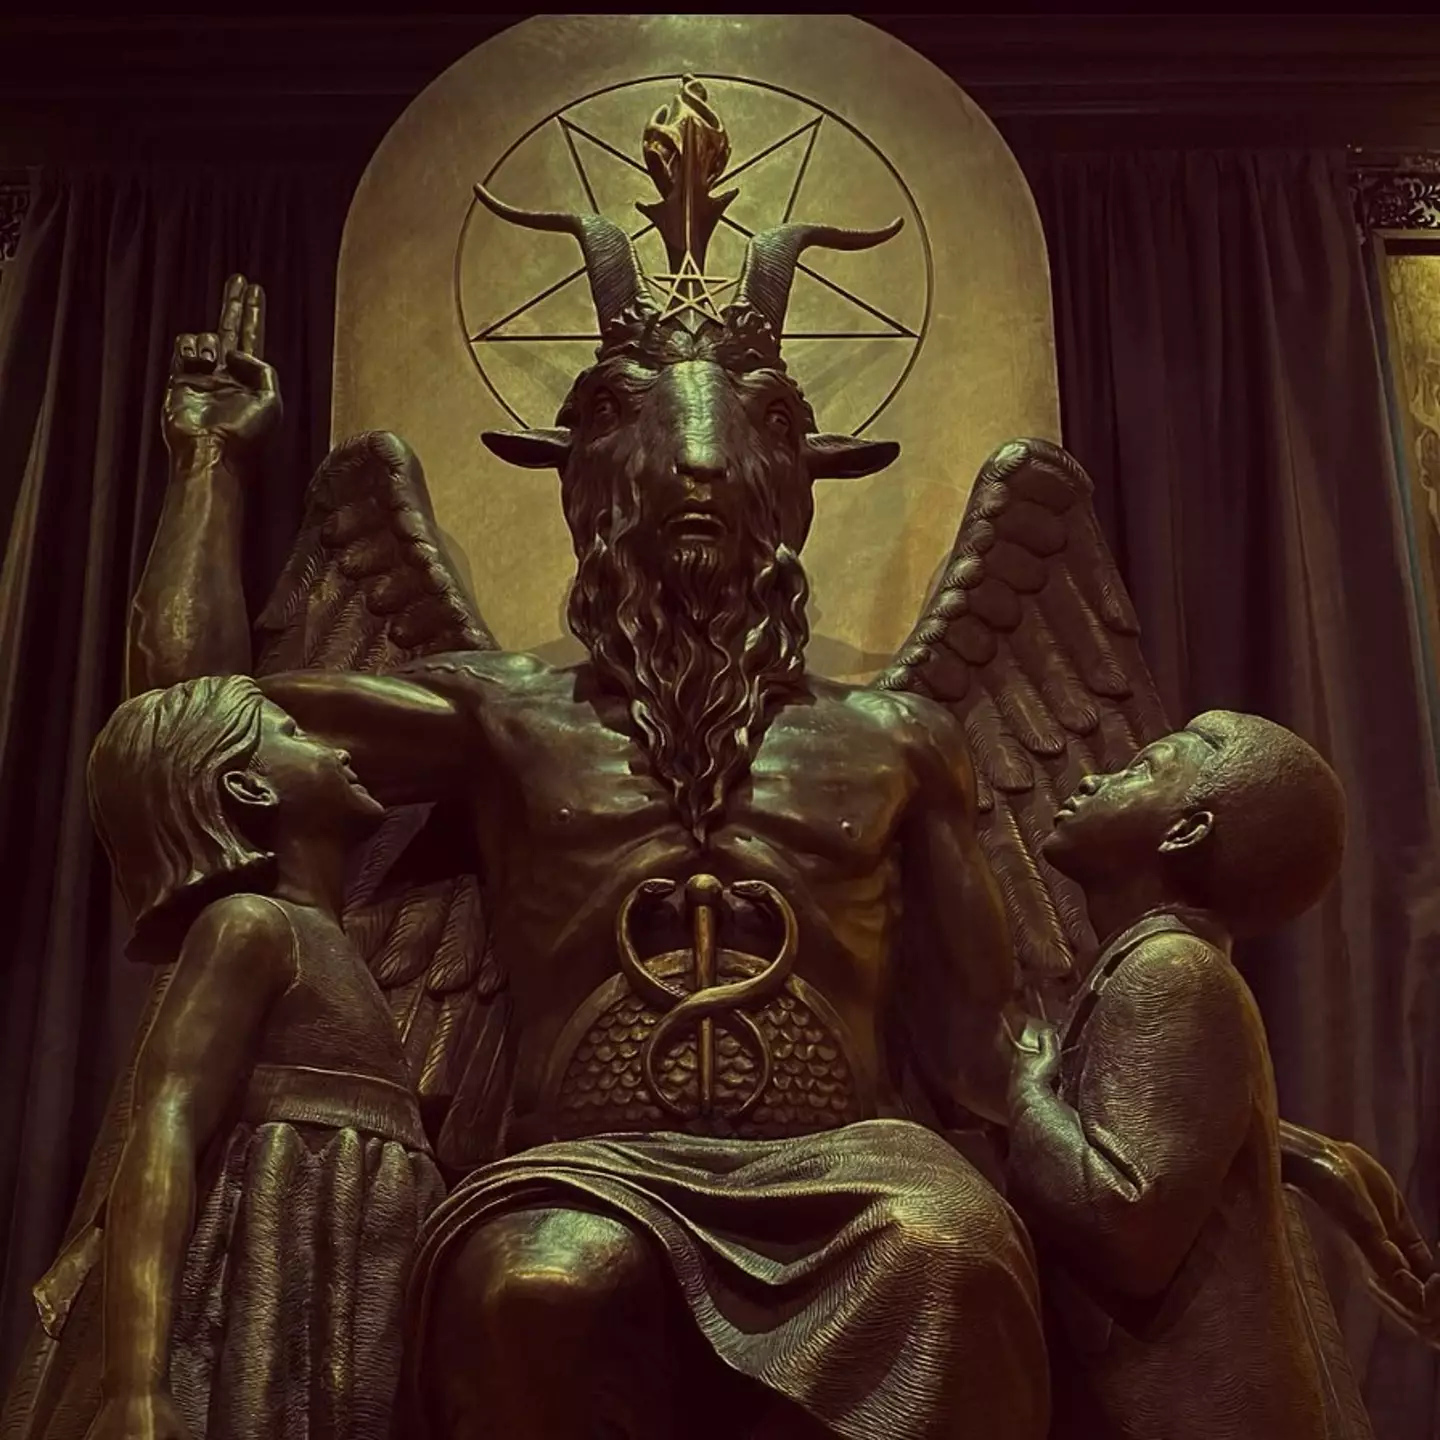 A statue used by the satanic temple.